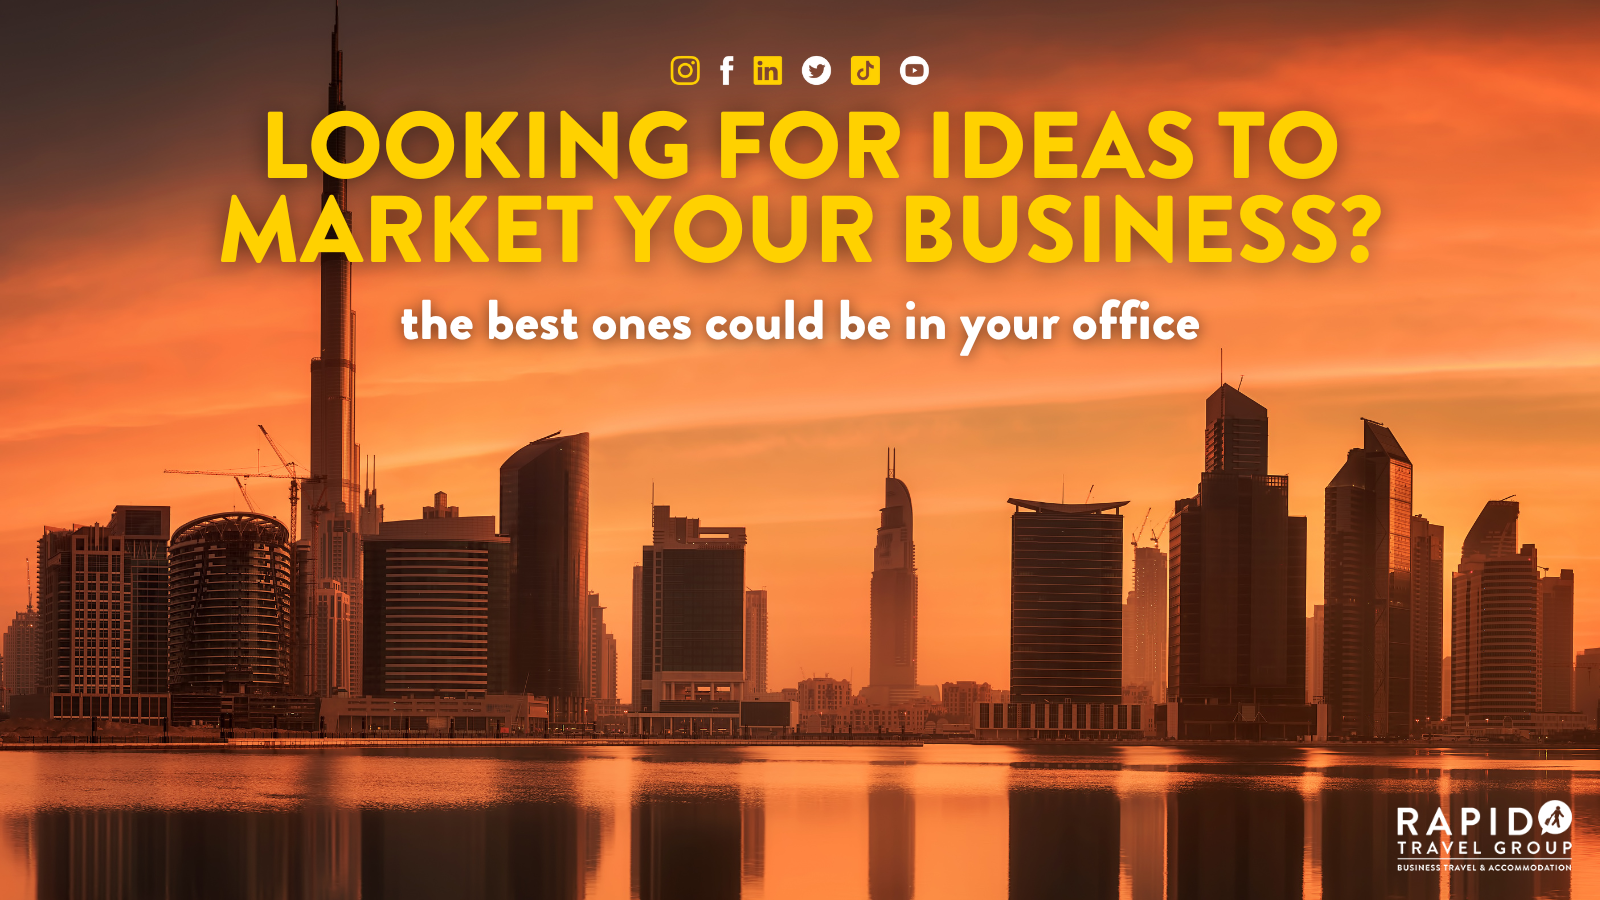 Looking for ideas to market your business? the best ones could be in your office